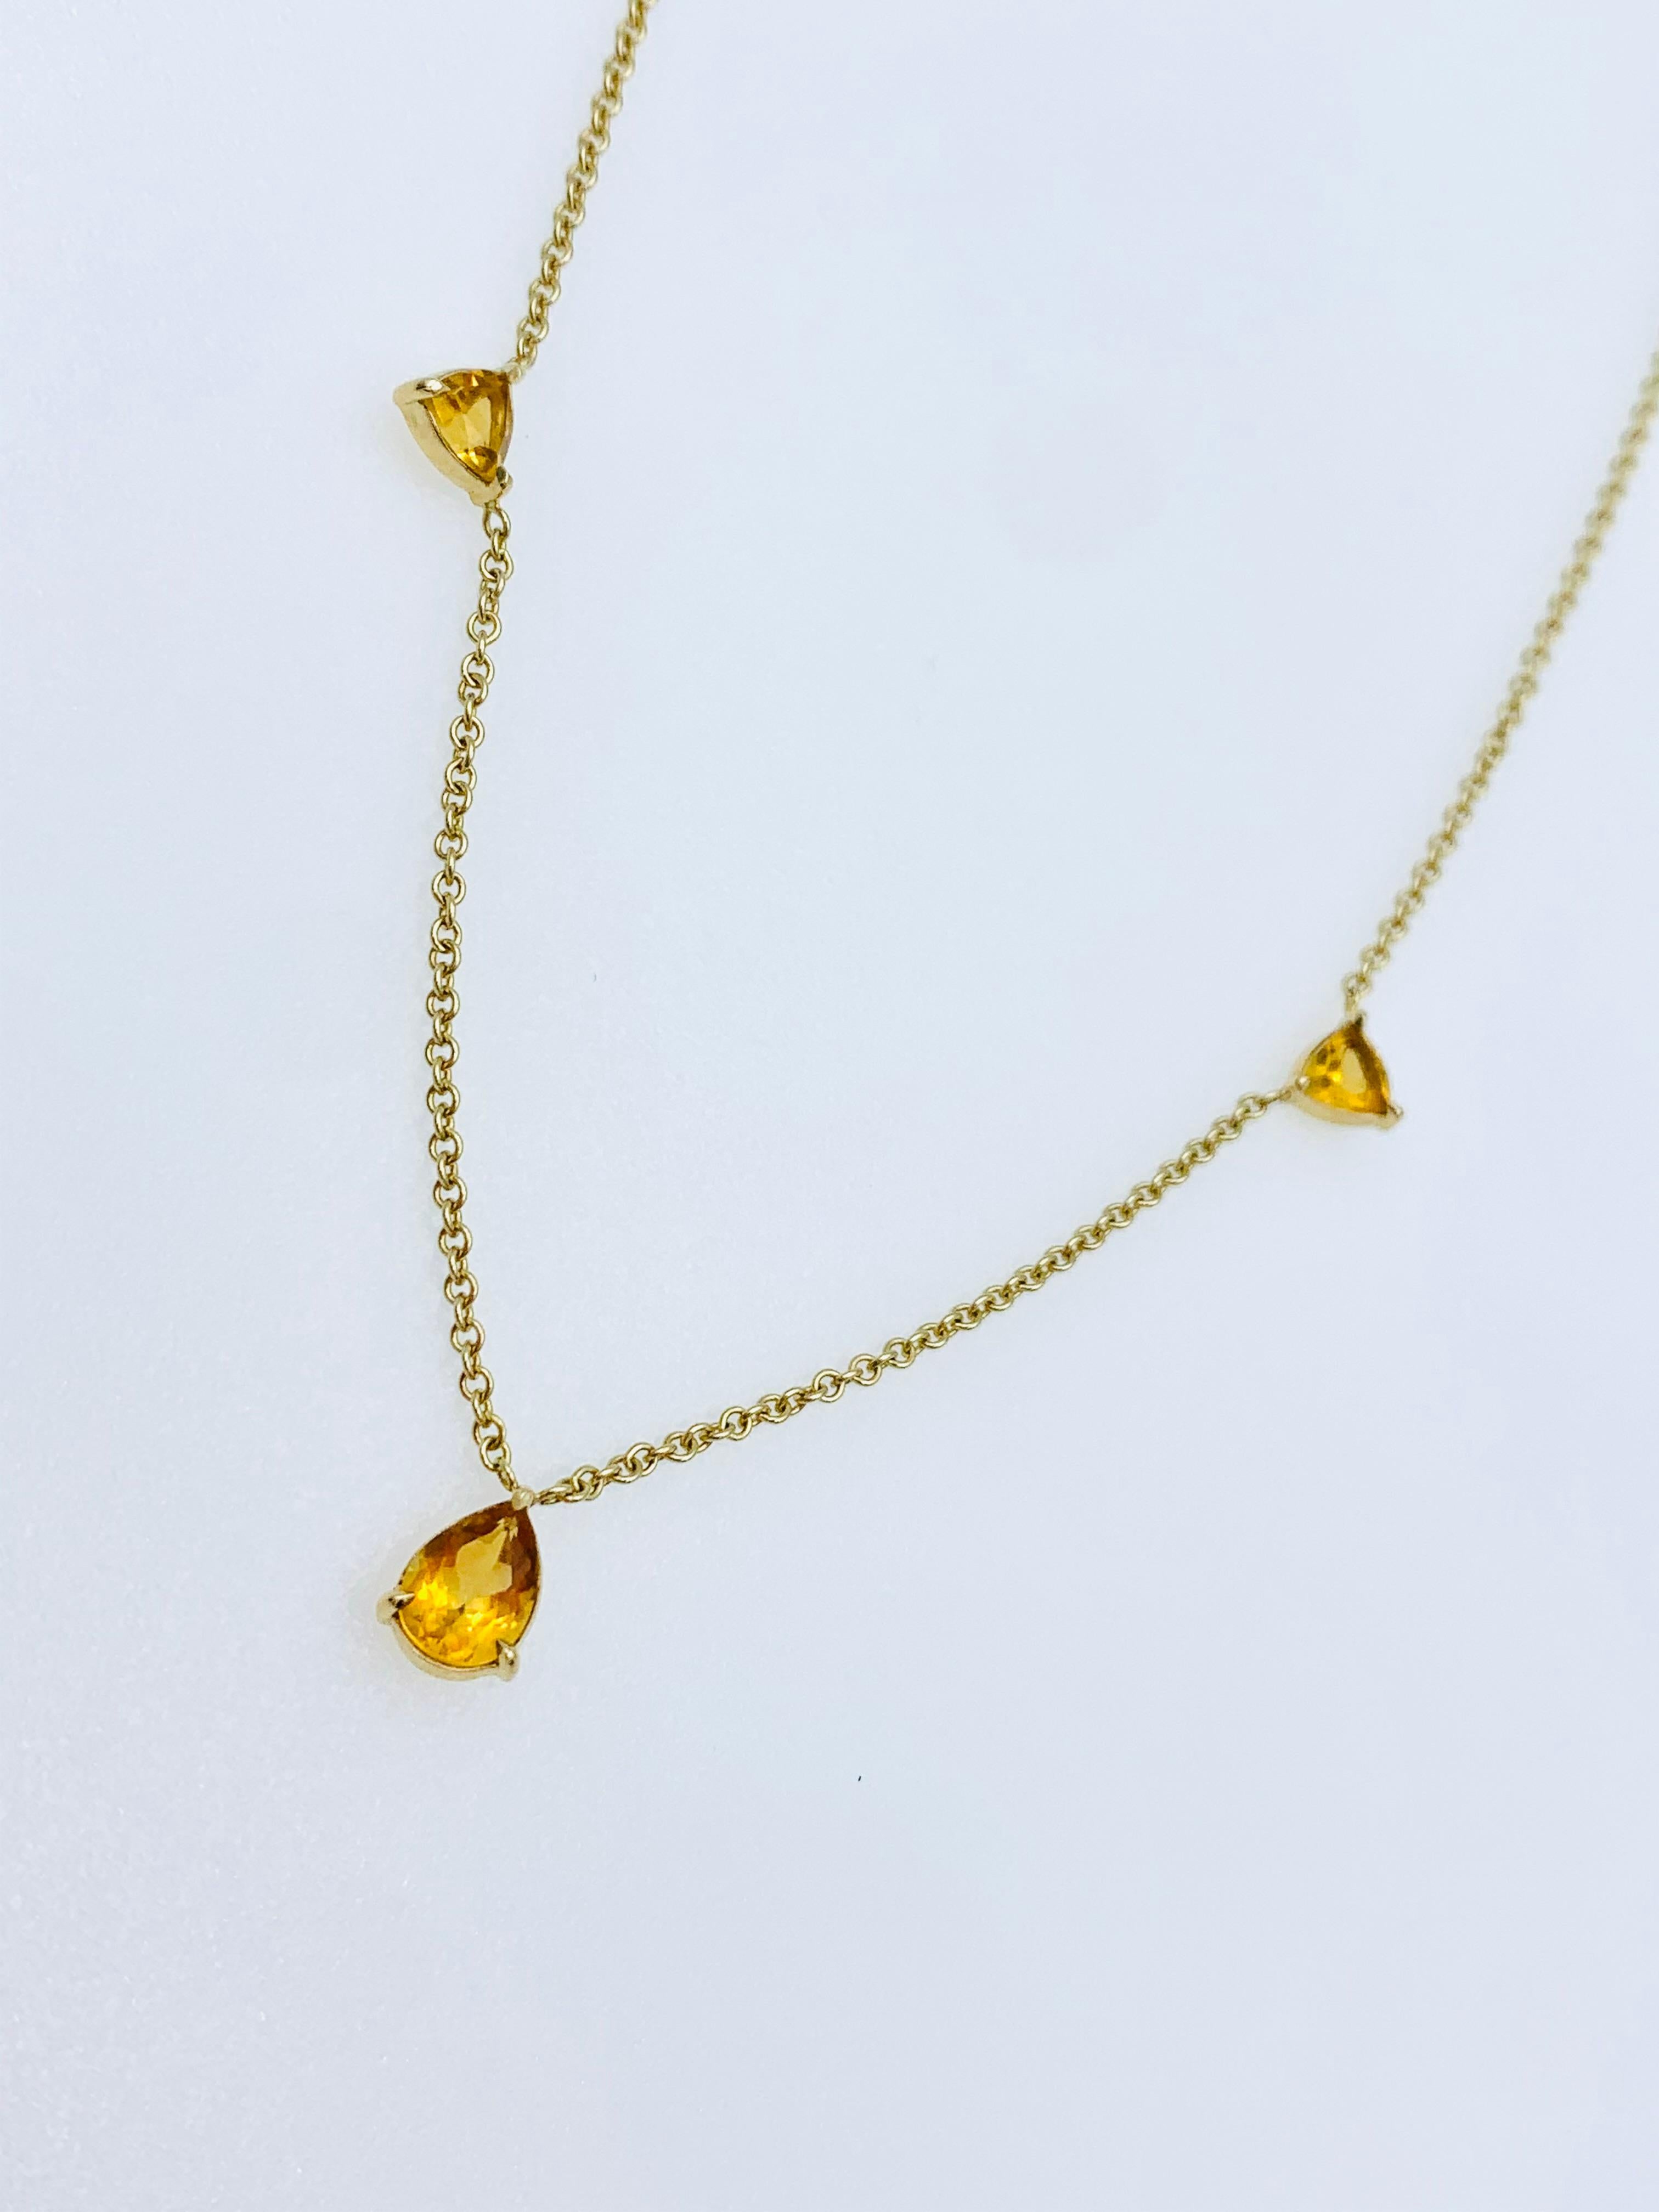 Hand made in 9 karat gold with two trillion cut shaped Citrines to the side and one pear cut shaped Citrine in the middle. It can be worn effortlessly for any occasion at two different lengths 16/15 